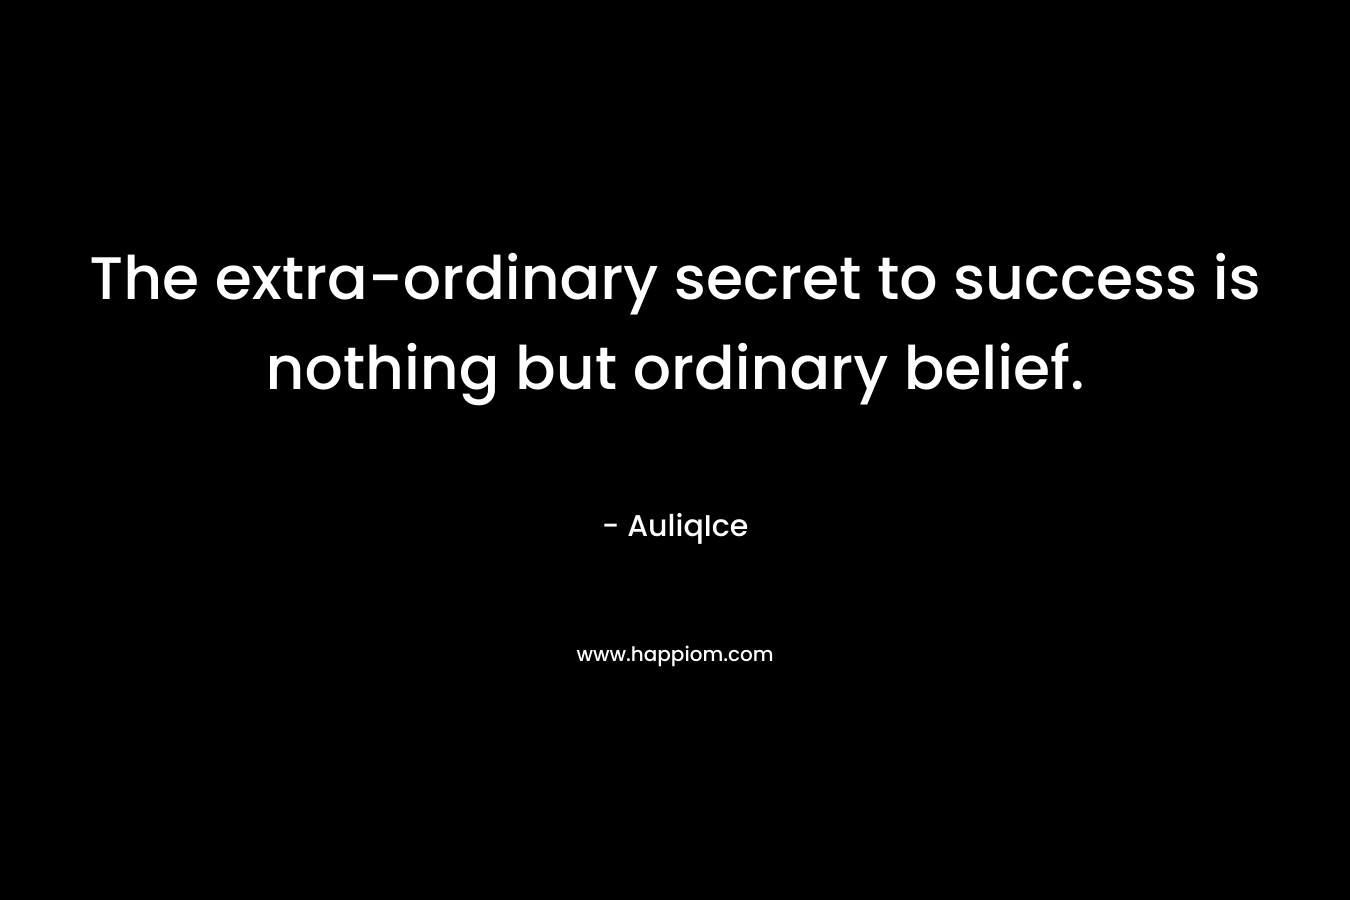 The extra-ordinary secret to success is nothing but ordinary belief.